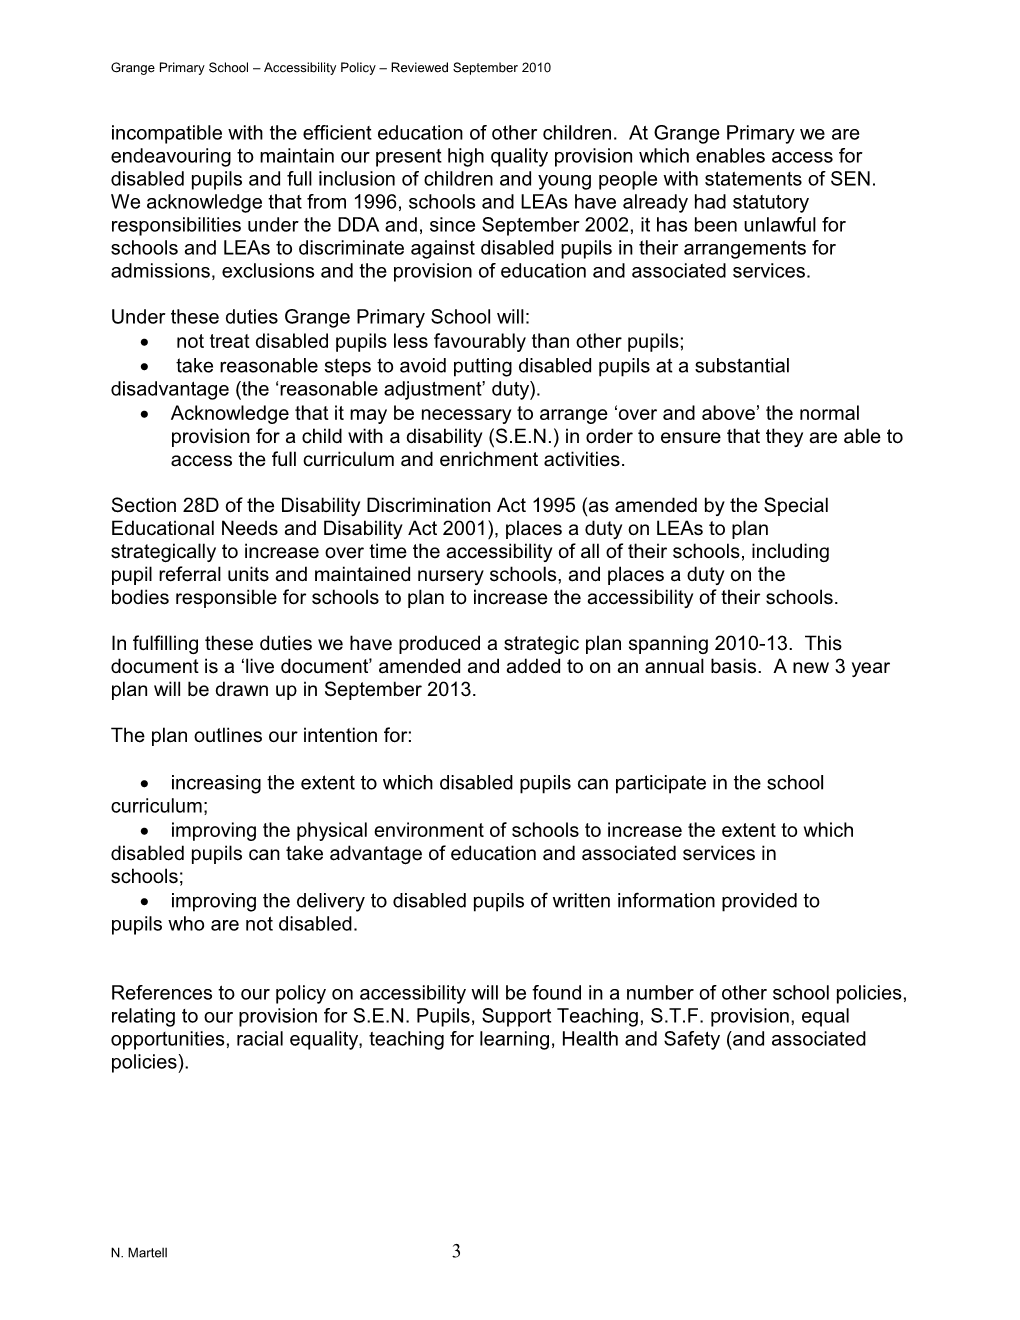 Grangeprimary School Accessibility Policy Reviewed September 2010